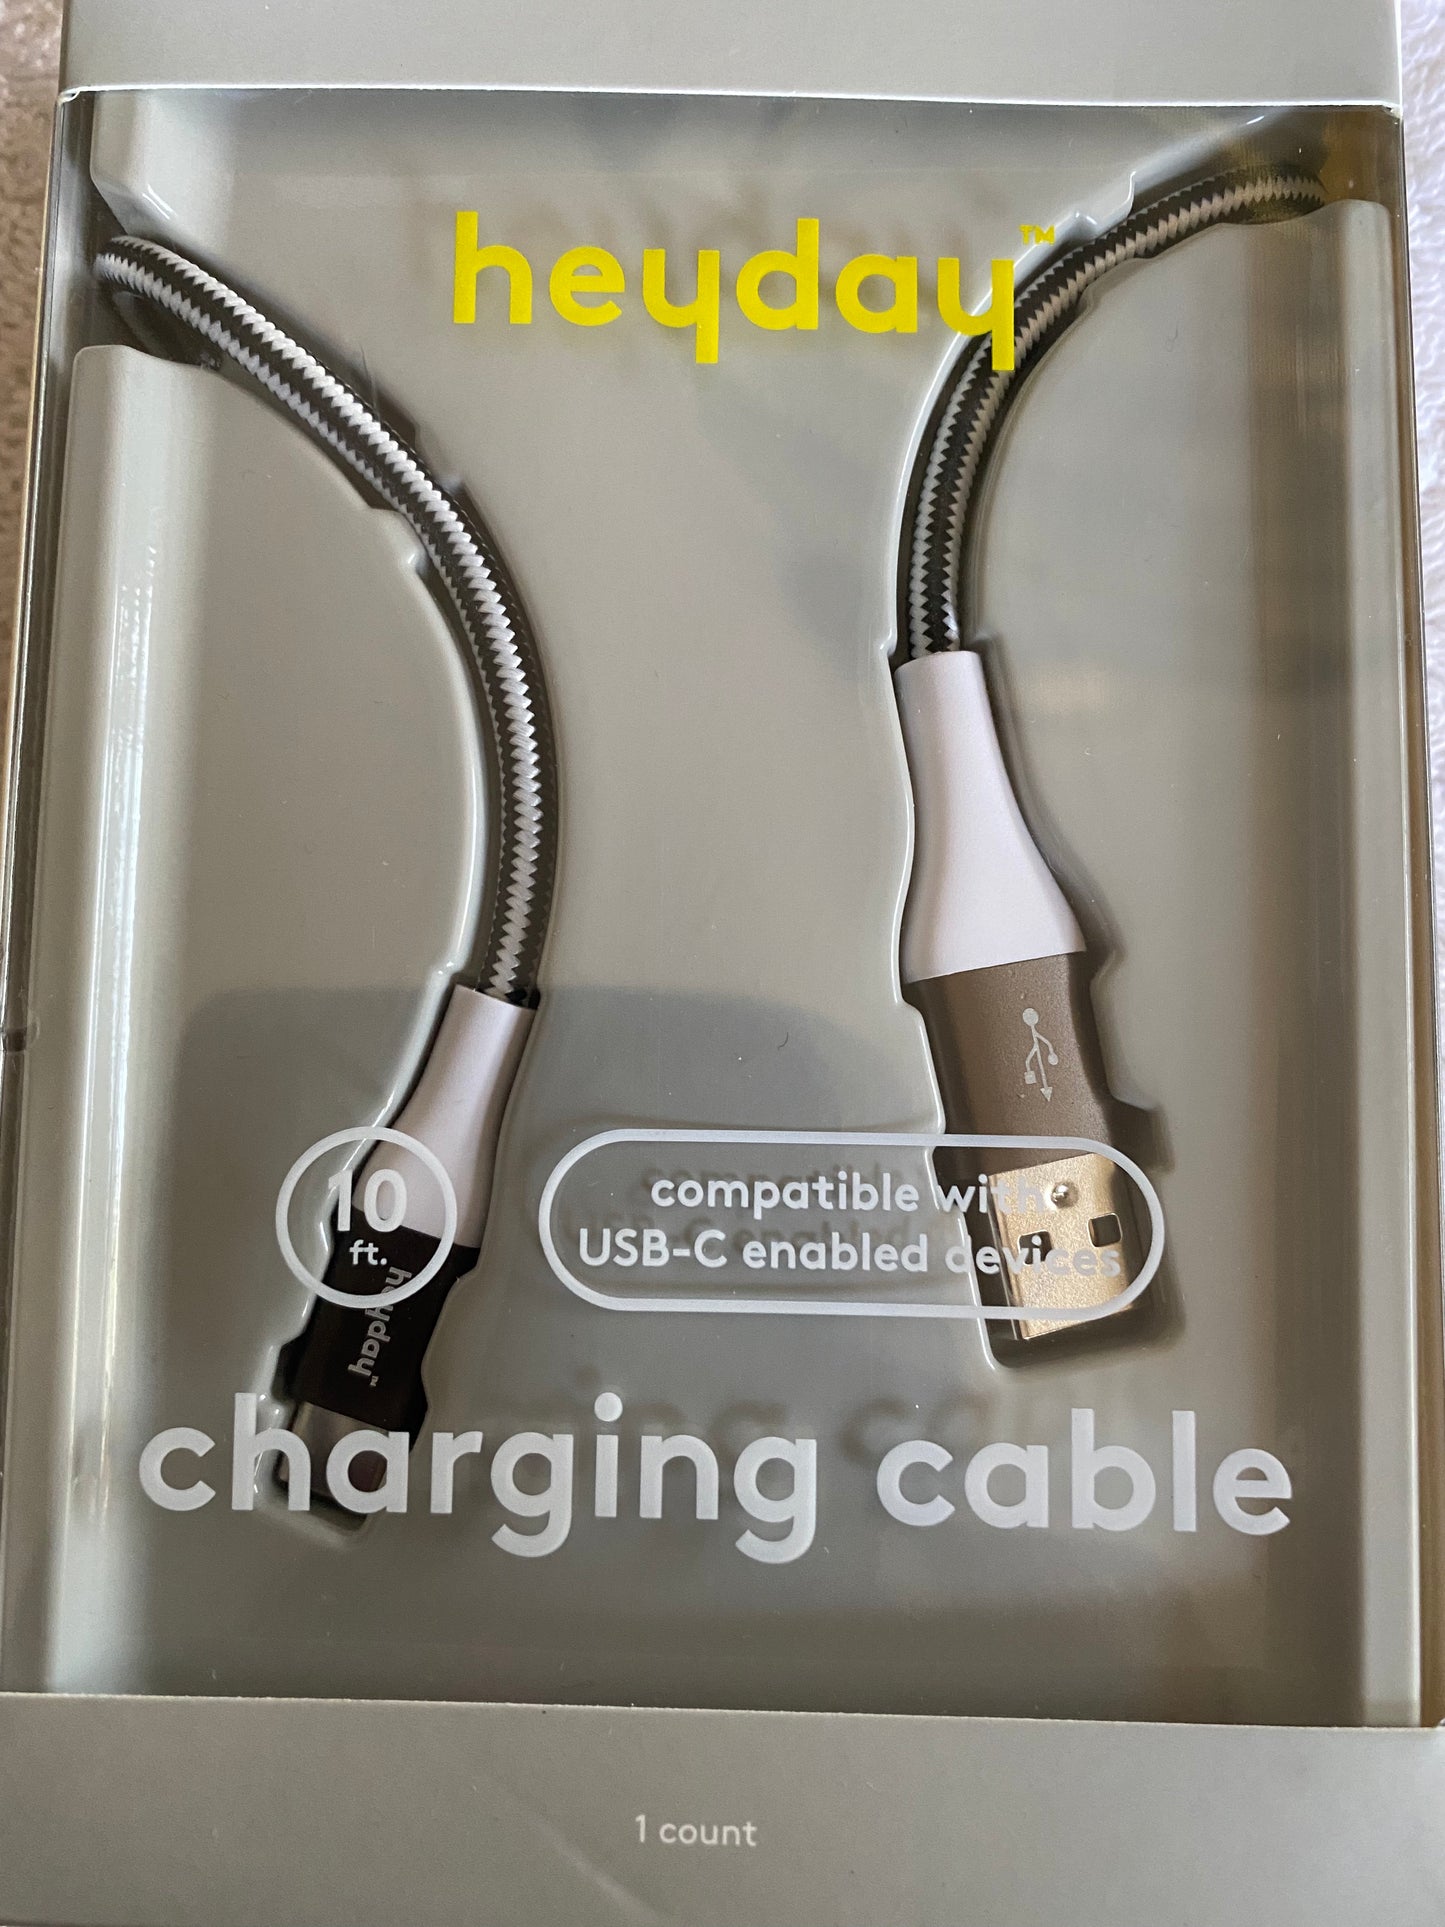 heyday 10 Feet Micro USB-A USB-C Braded Universal Charging cable Open Box Wht/Bk